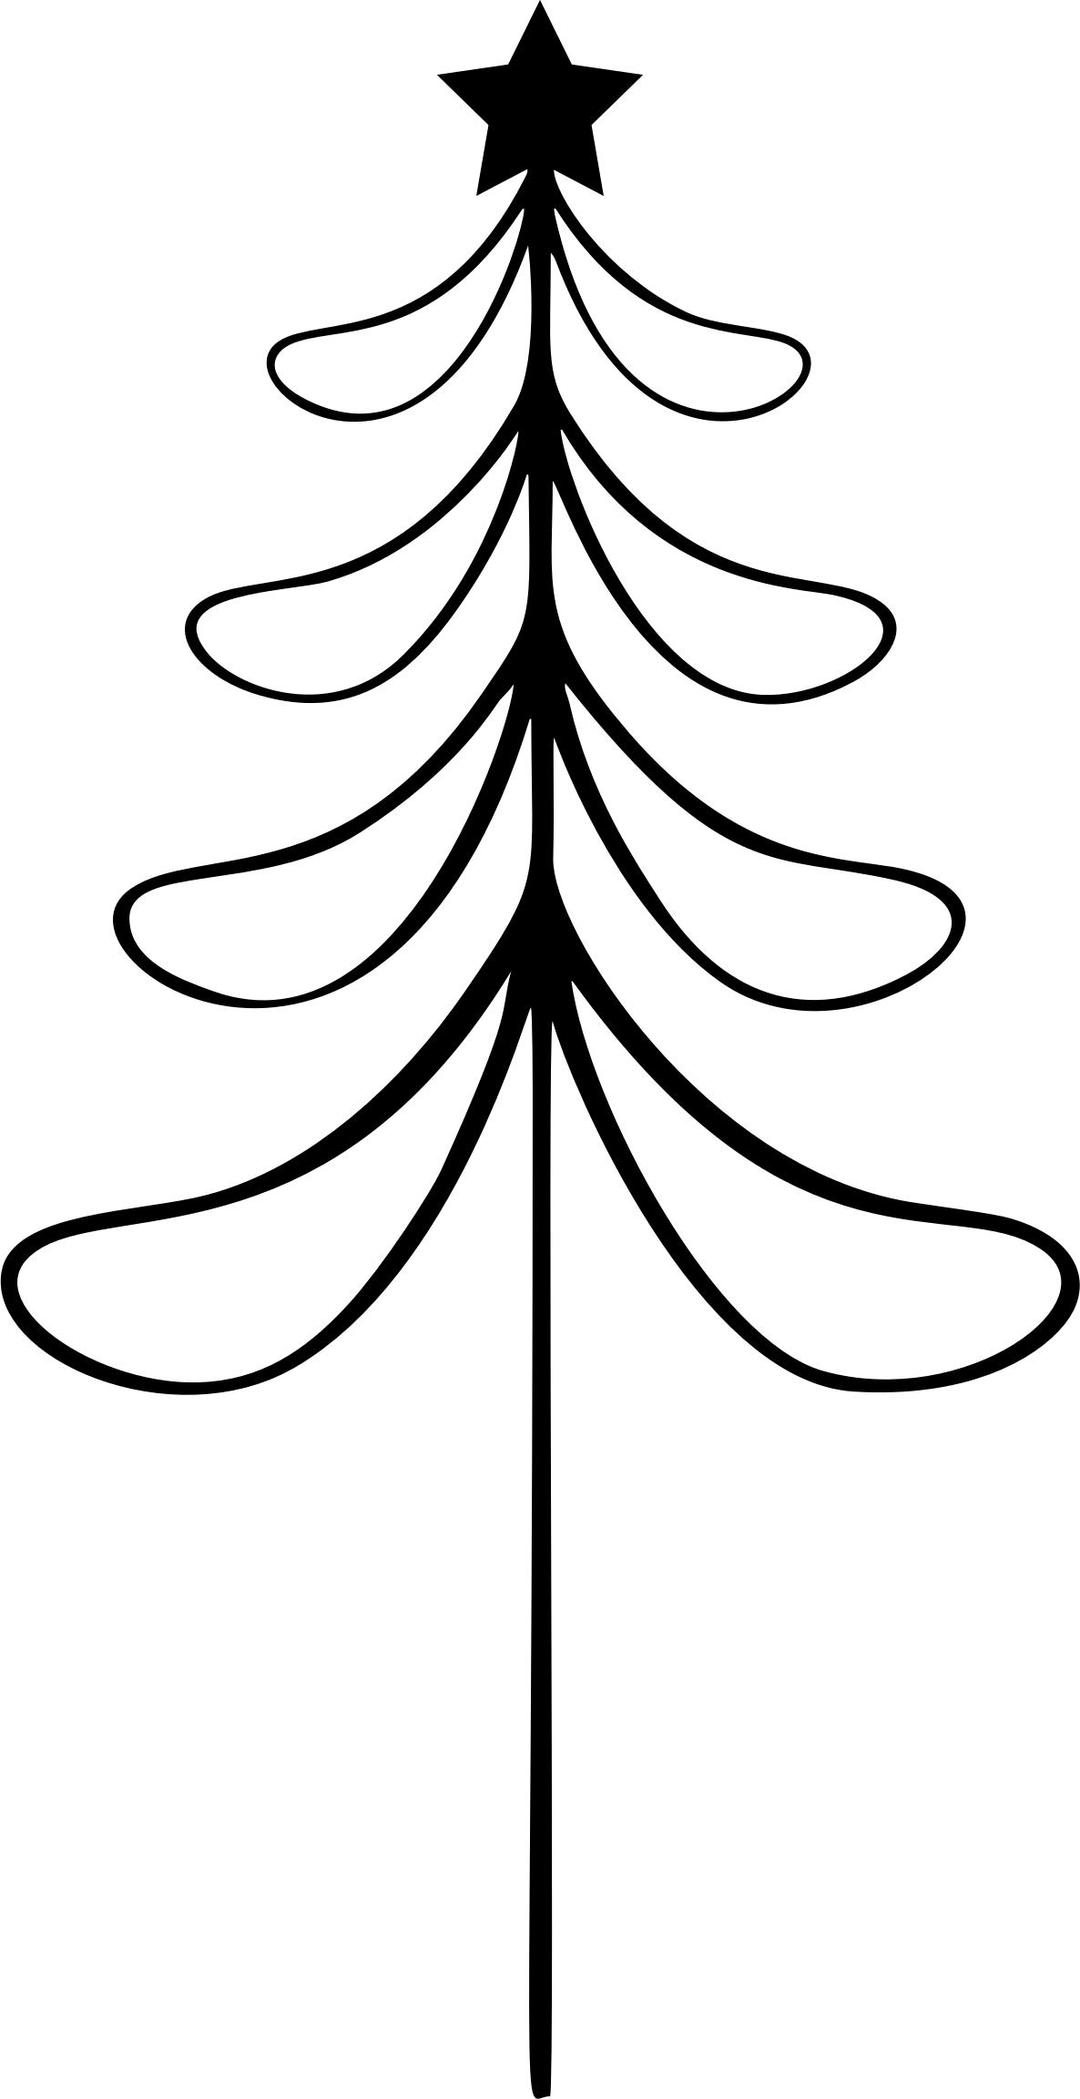 Abstract Christmas Tree Line Art 2 png transparent